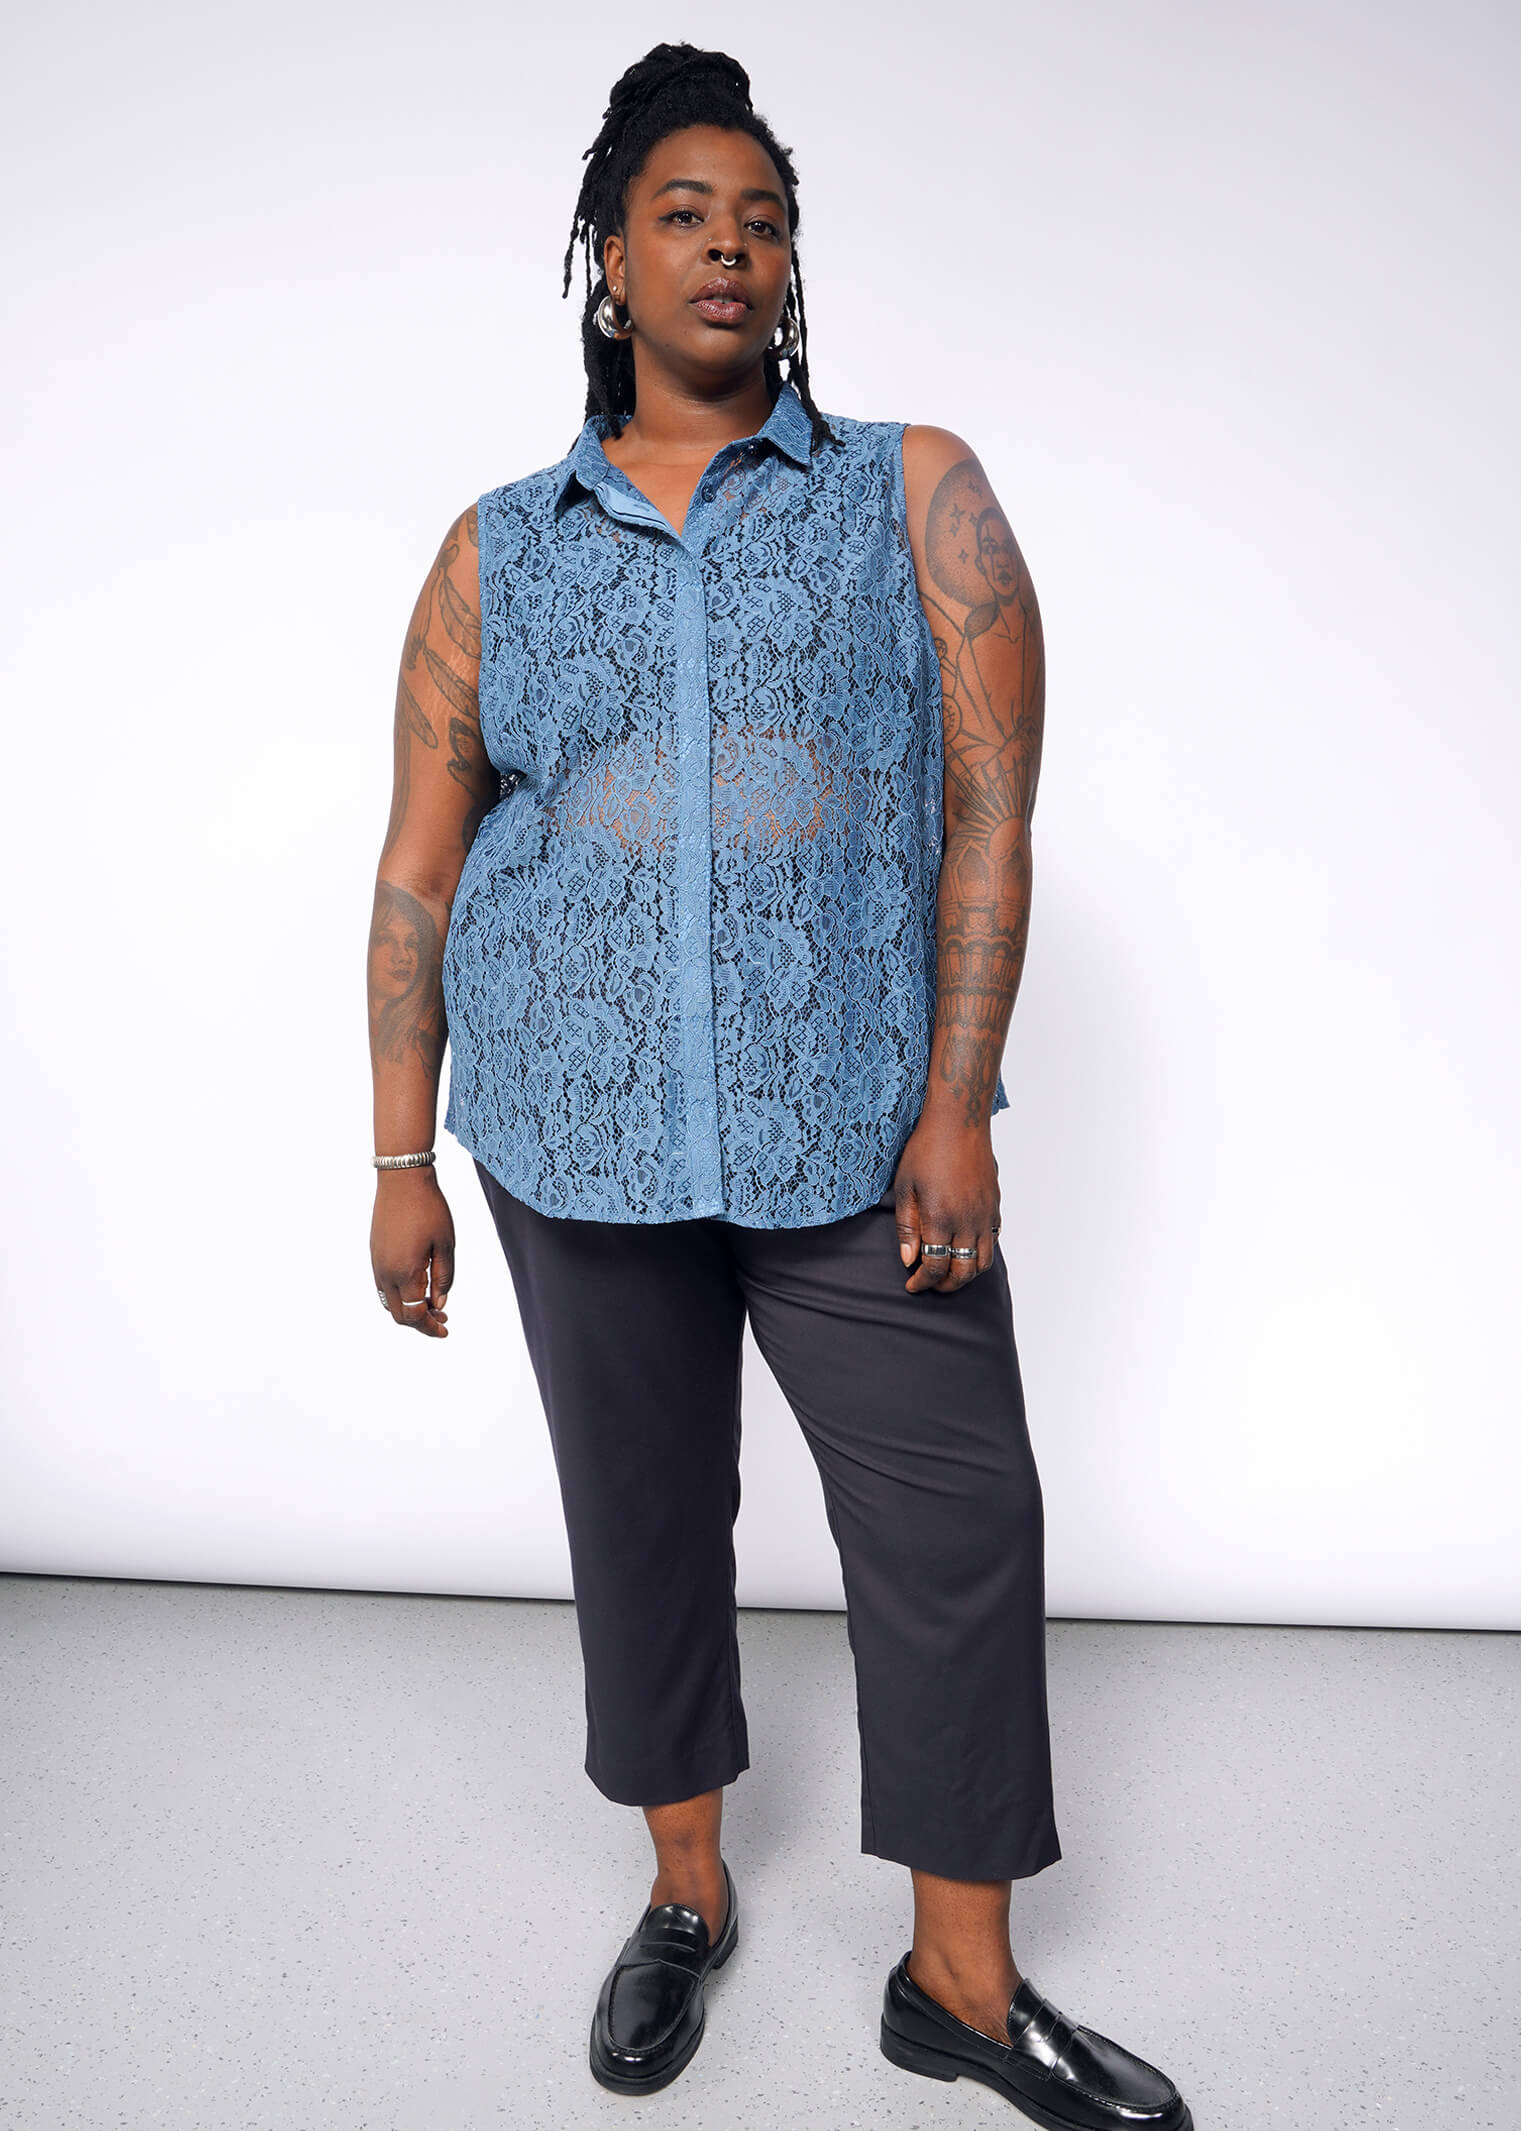 The Empower Lace Sleeveless Button Up